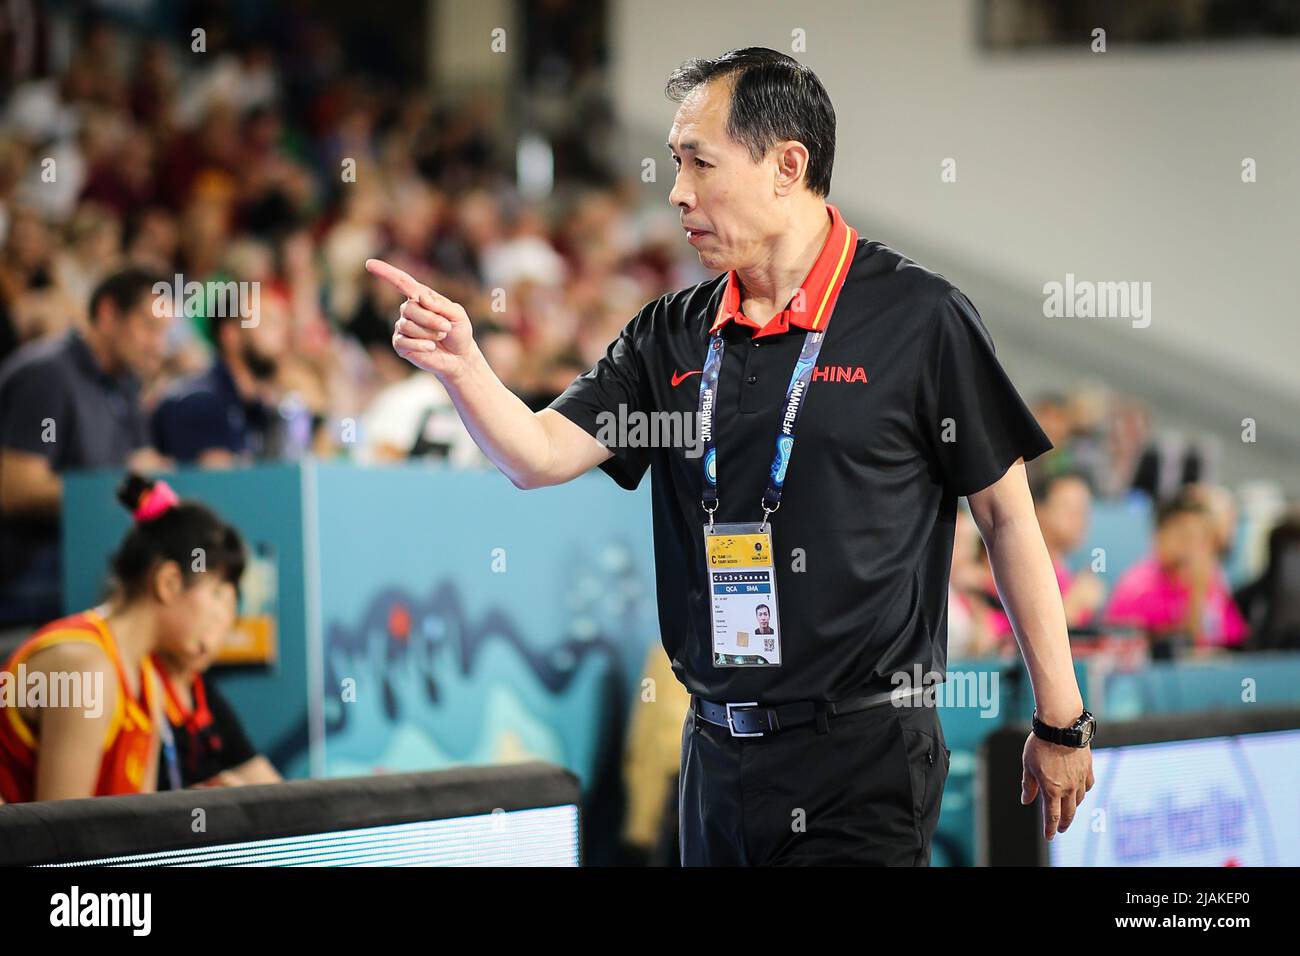 Spain, Tenerife, September 22, 2018: Chinese national basketball head coach Limin Xu during the Women's Basketball World Cup Stock Photo